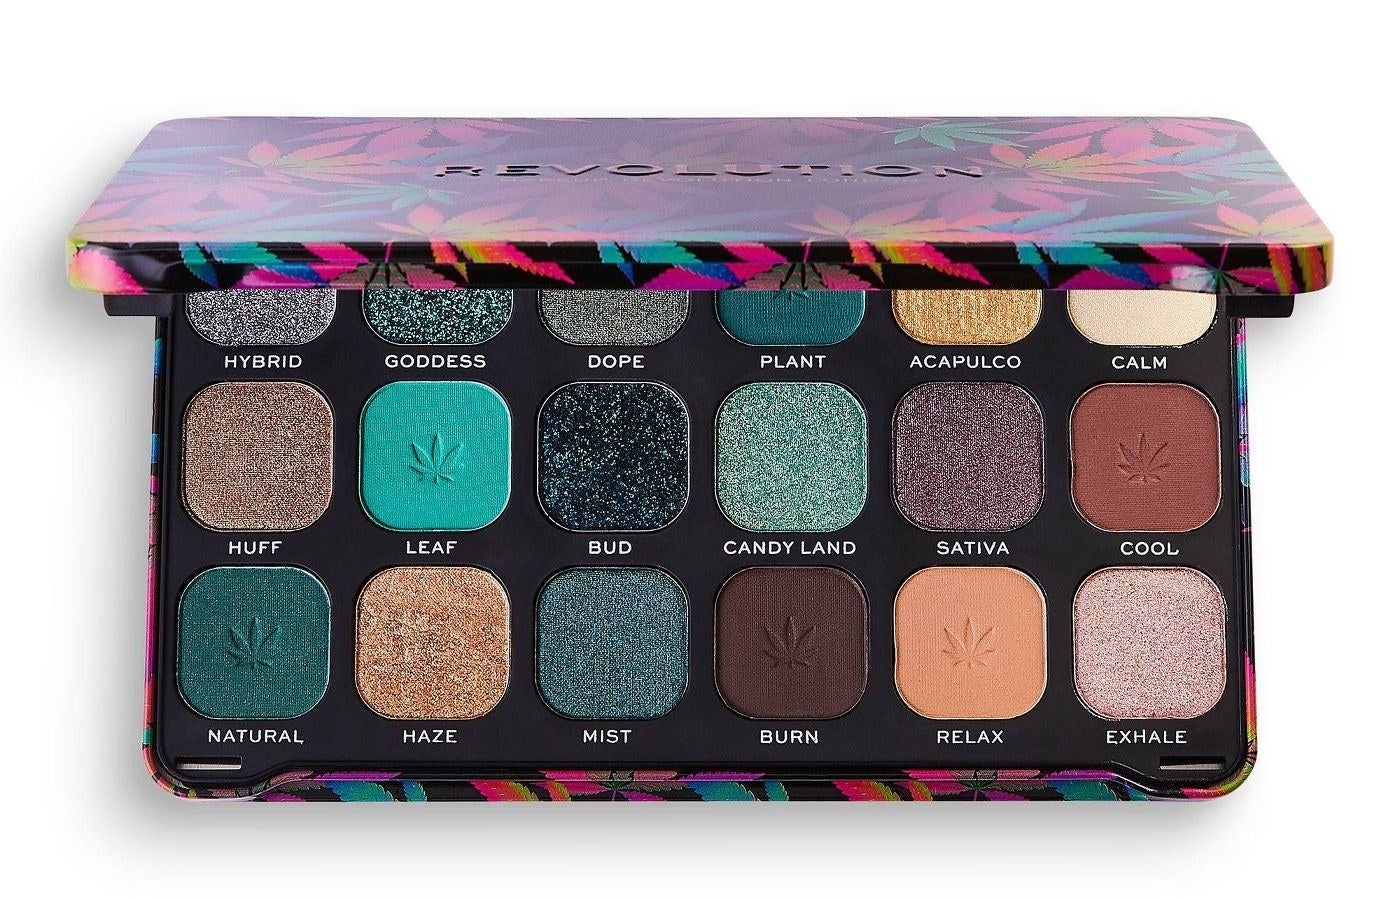 The Chilled with Cannabis Sativa Makeup Revolution Forever Flawless Eyeshadow Palette